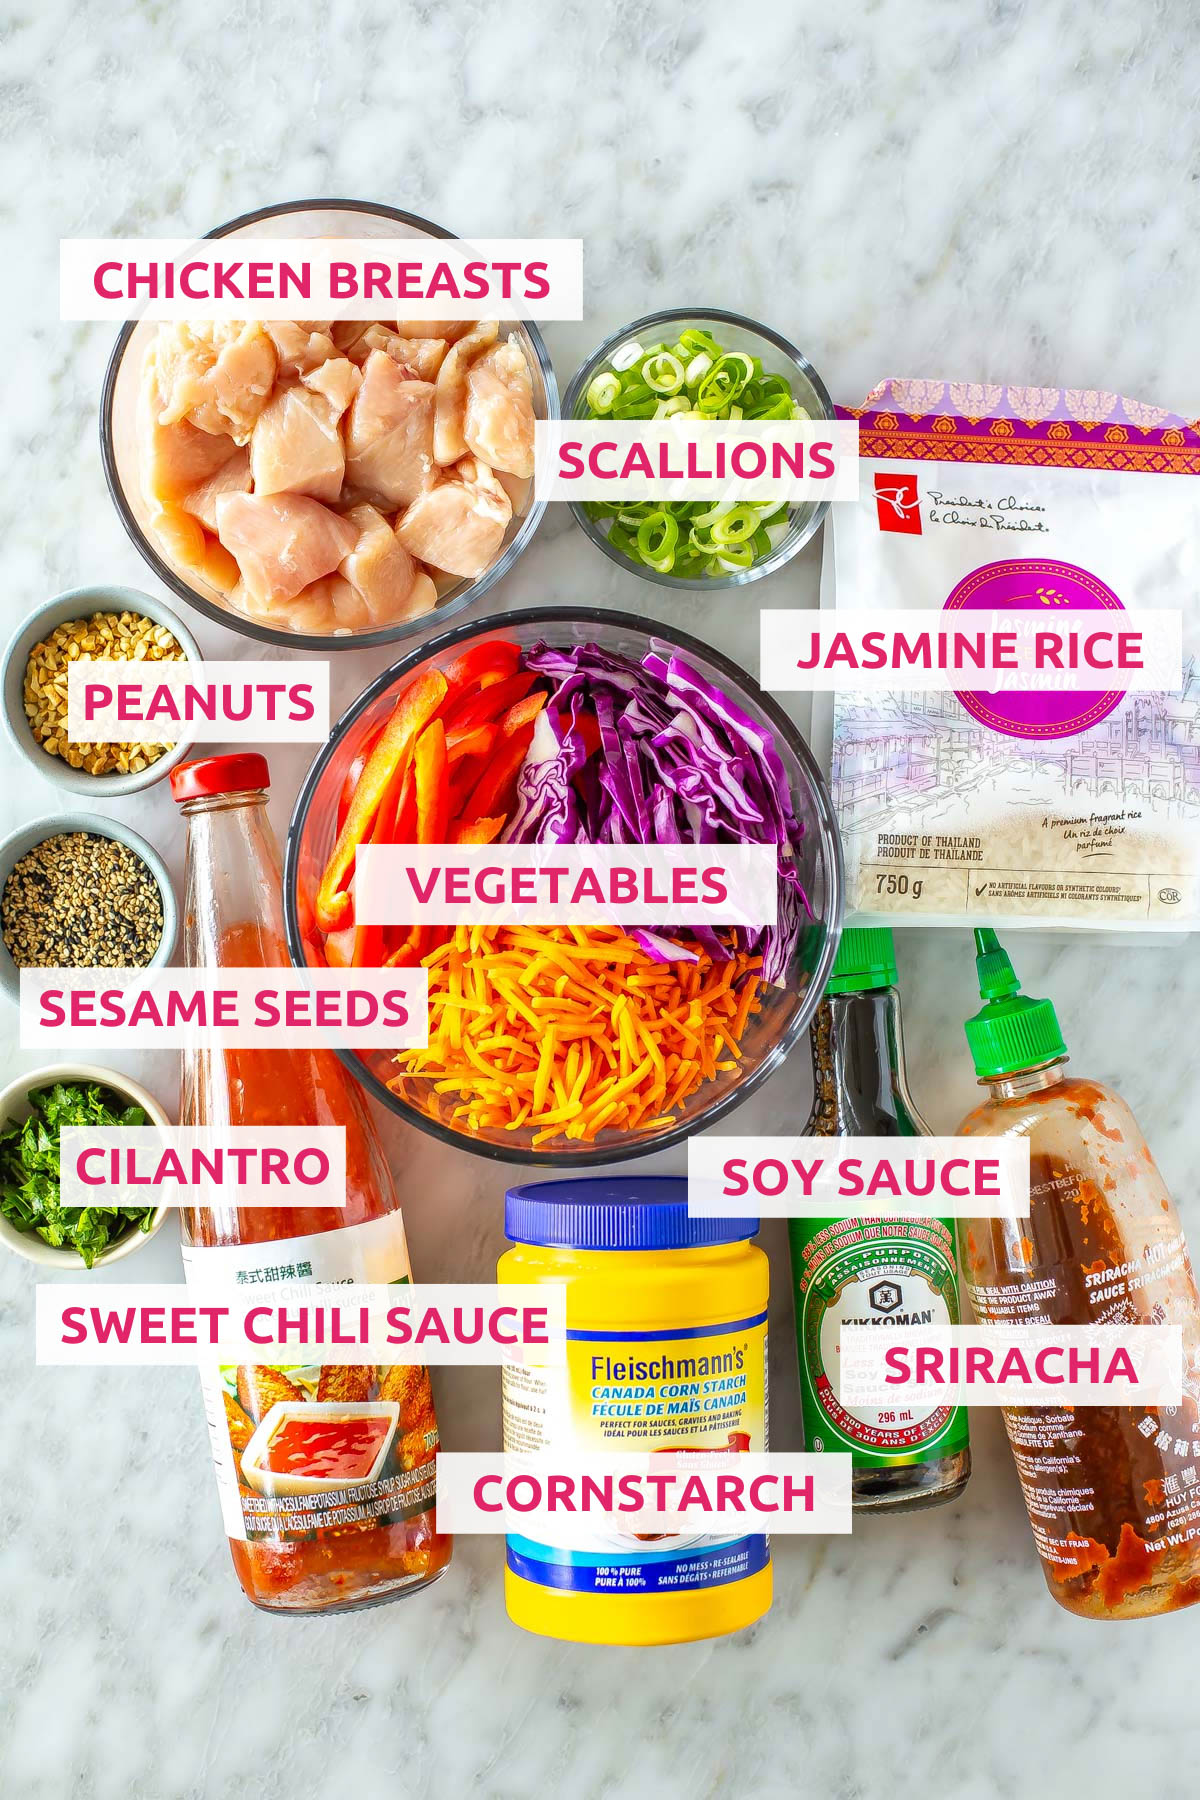 Ingredients for sweet chili chicken: chicken breasts, jasmine rice, peanuts, scallions, vegetables, sesame seeds, cilantro, sweet chili sauce, cornstarch, soy sauce and sriracha.